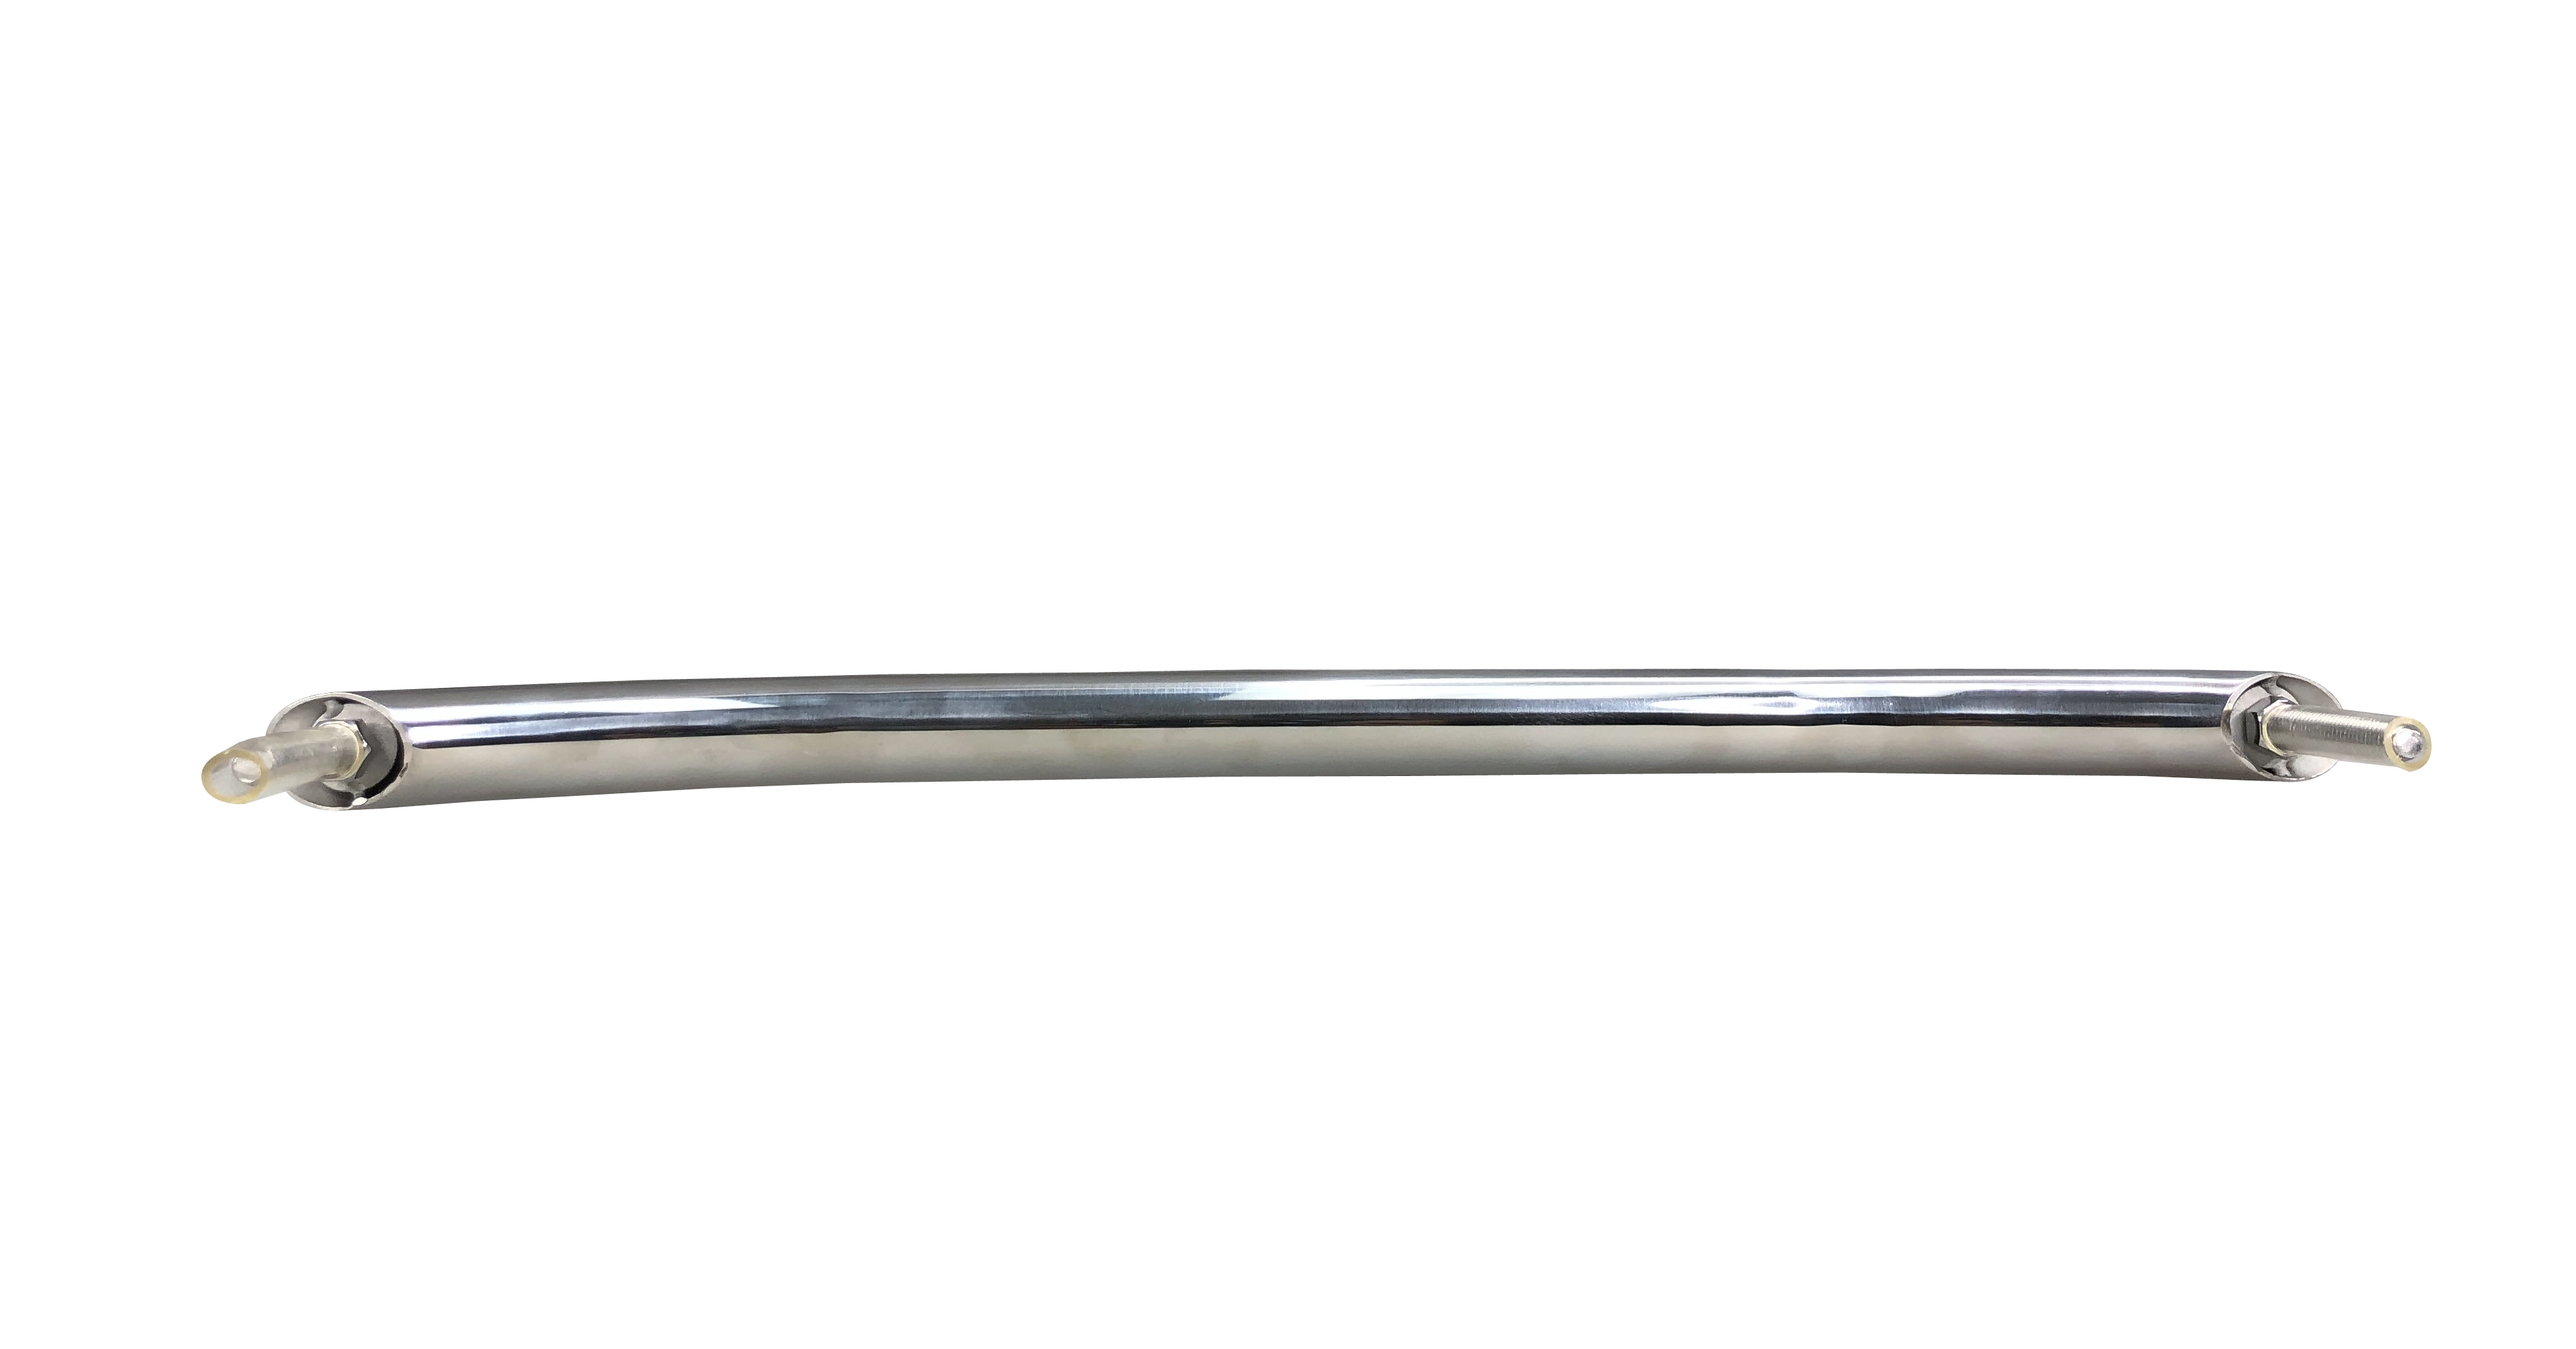 Boat Marine Stainless Steel HANDRAIL 18 INCHES with Studs Hardware 